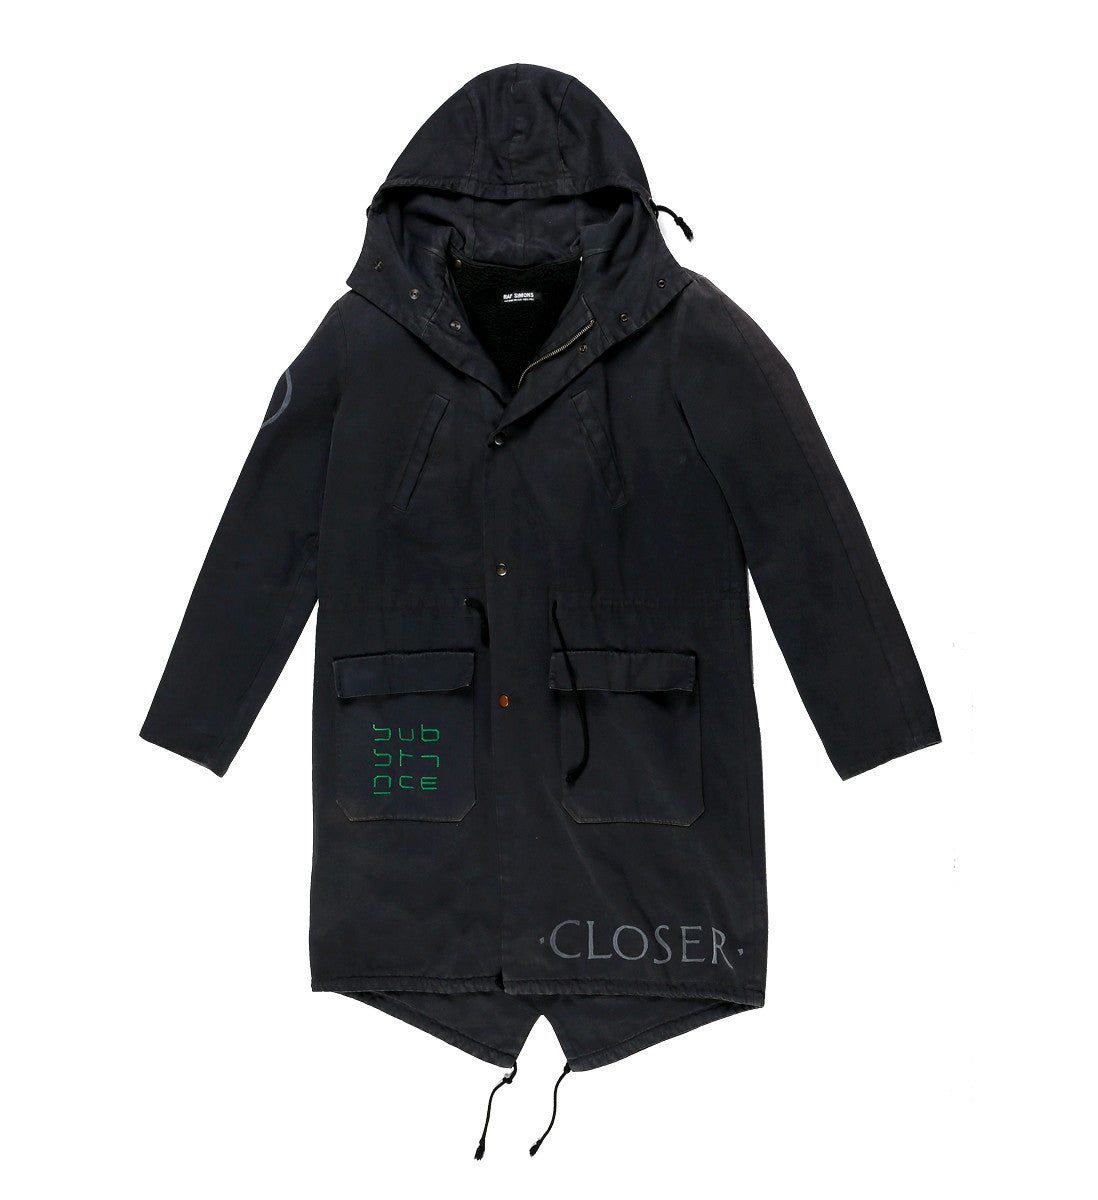 Raf Simons Iconic Aw03-04 'Closer' Parka – The Salvages